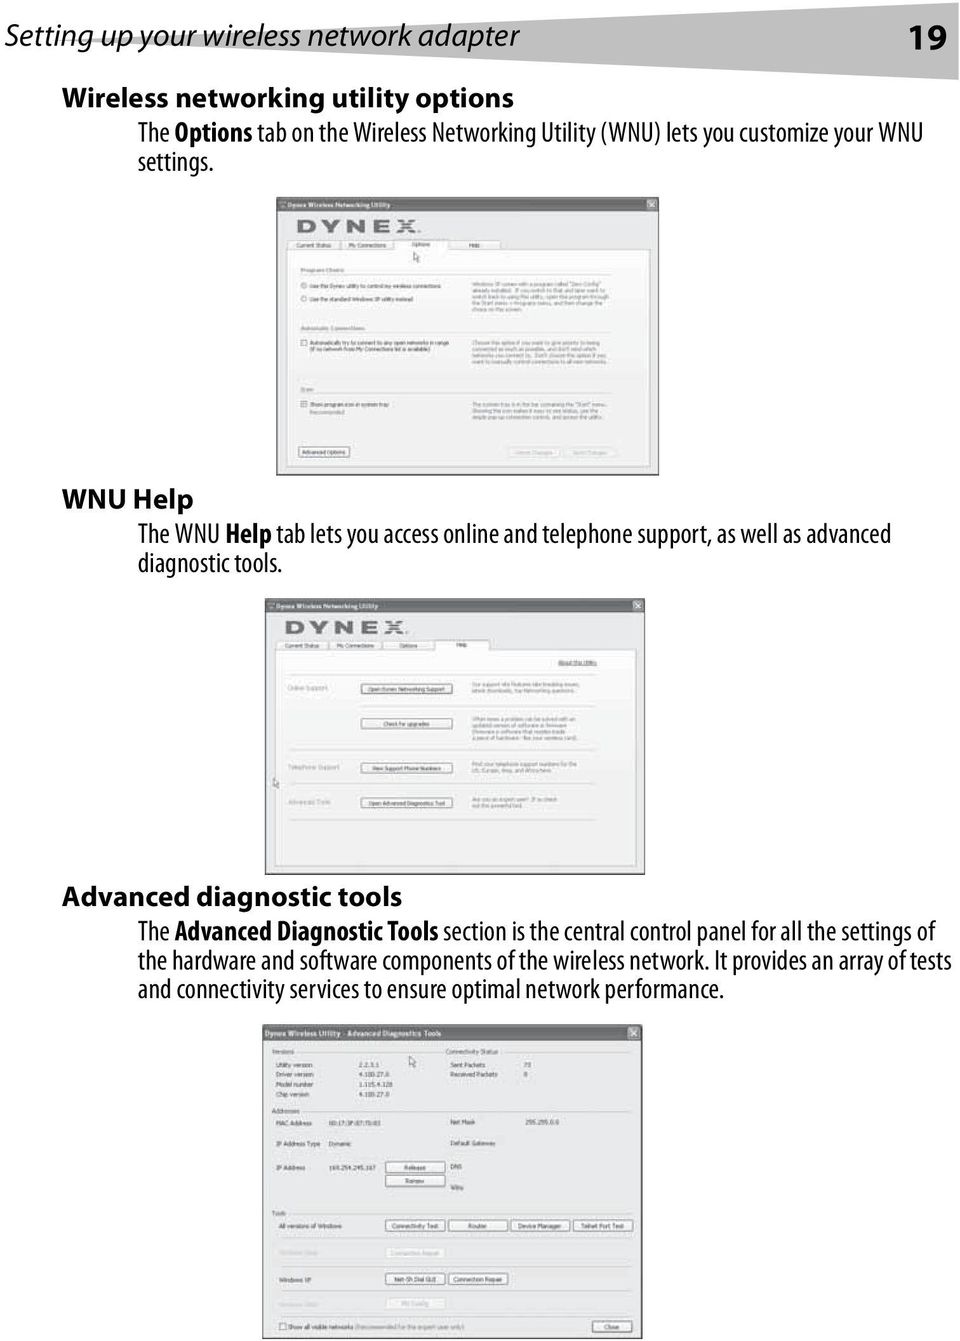 WNU Help The WNU Help tab lets you access online and telephone support, as well as advanced diagnostic tools.